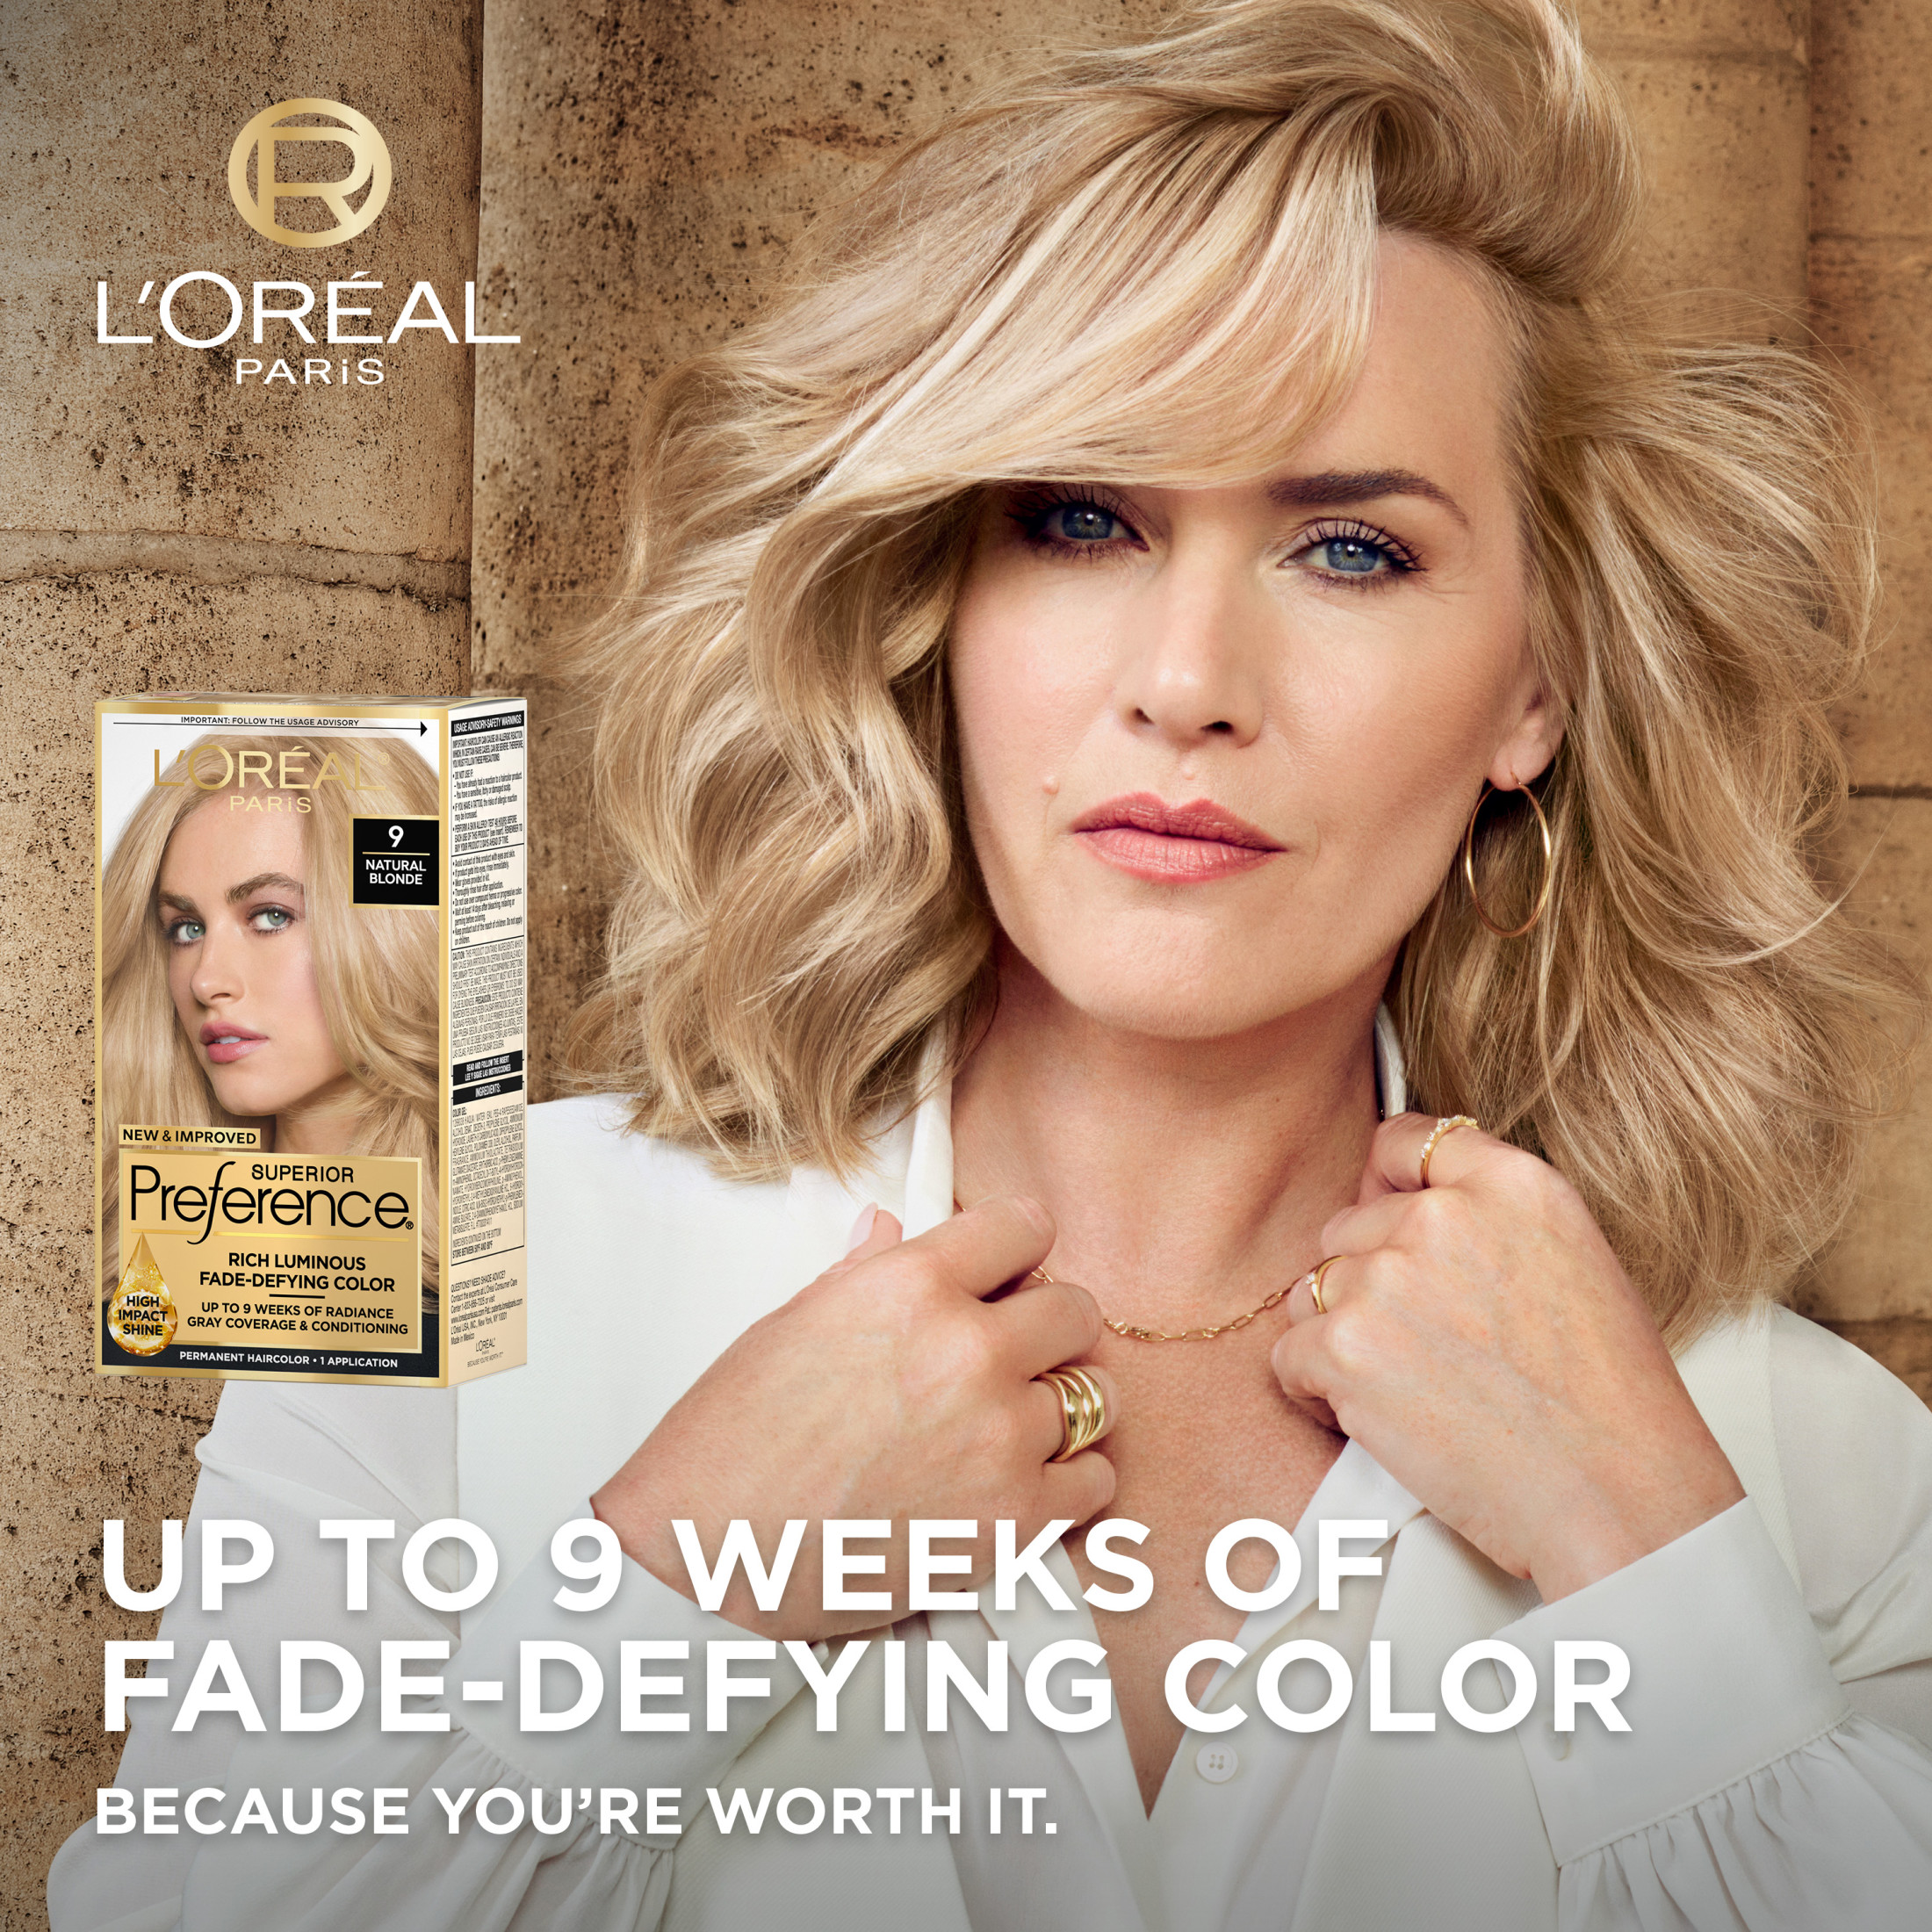 L'Oreal Paris Superior Preference Permanent Hair Color, Lightest Golden Brown - image 3 of 9